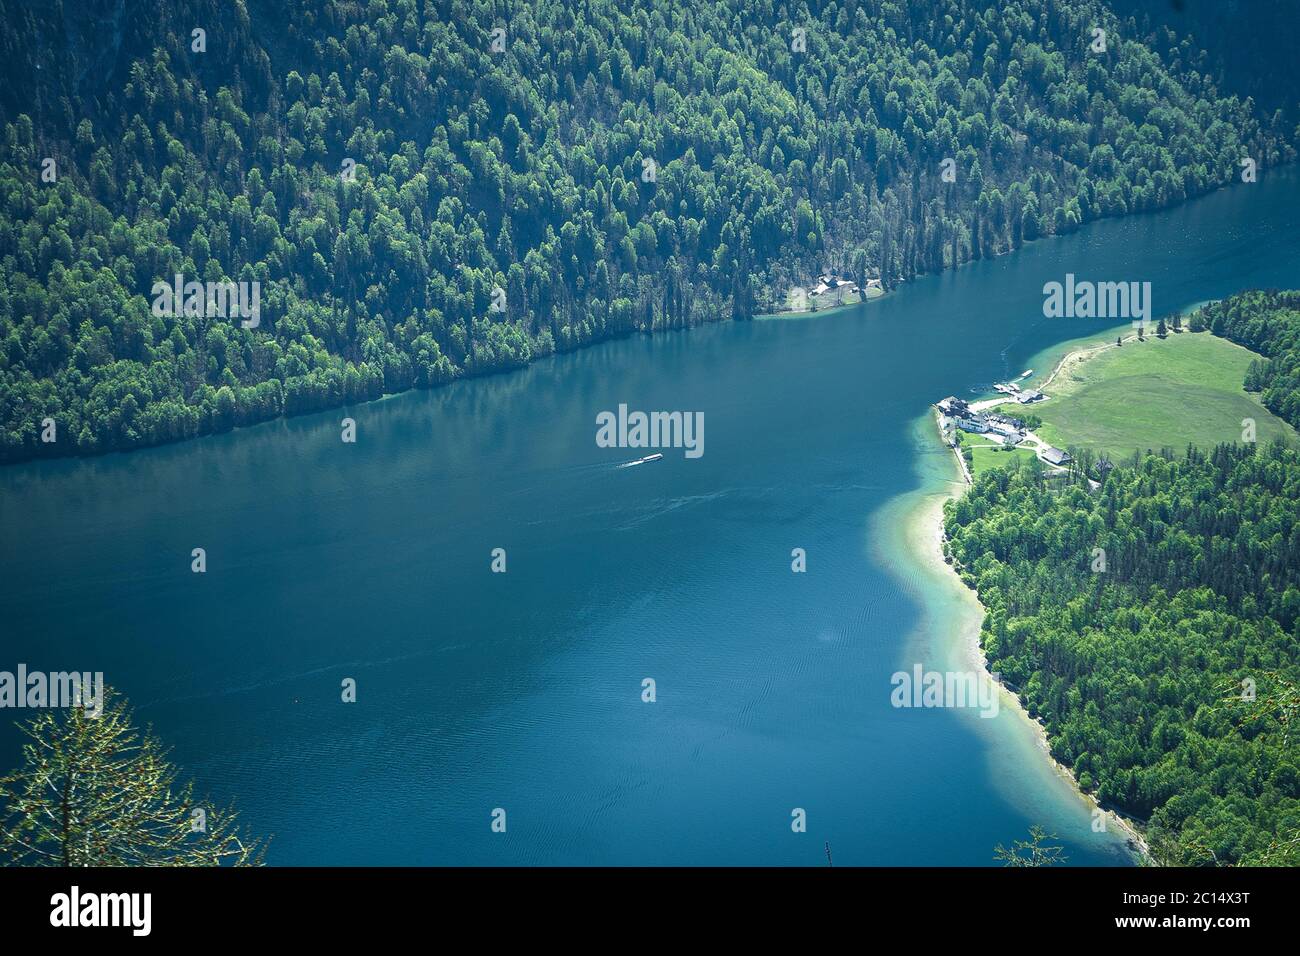 Panoramic view of Lake and Mountain in the background during a sunny day. Taken in viewpoint Archenkanzel, Konigssee lake in Berchtesgaden, Germany. Stock Photo